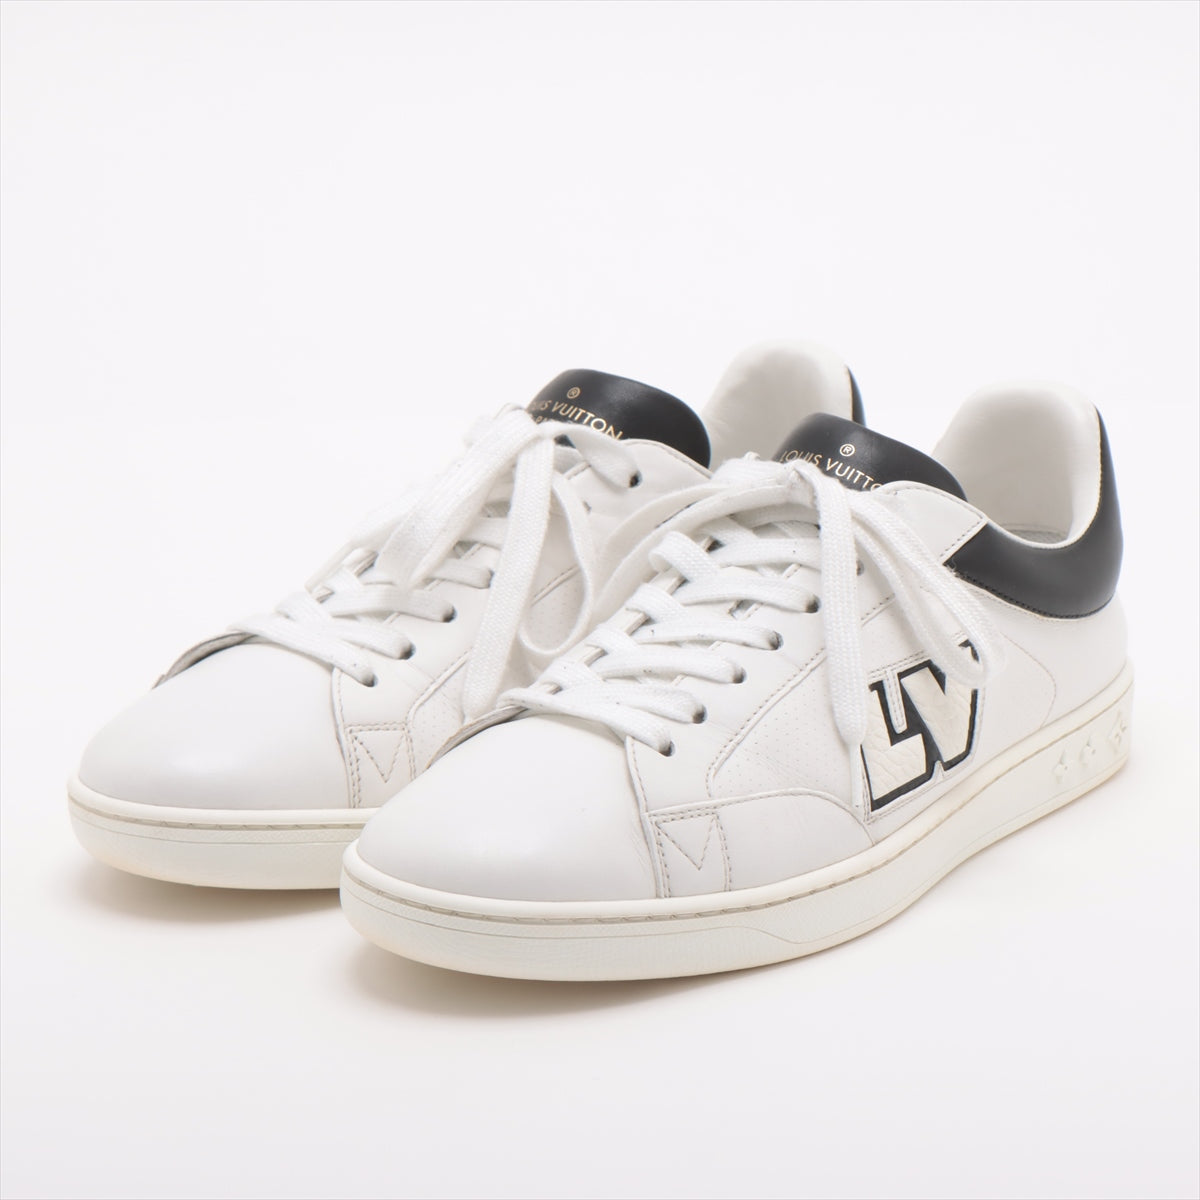 Louis Vuitton Luxembourg Line 21 years Leather Sneakers 6 Men's White FA0231